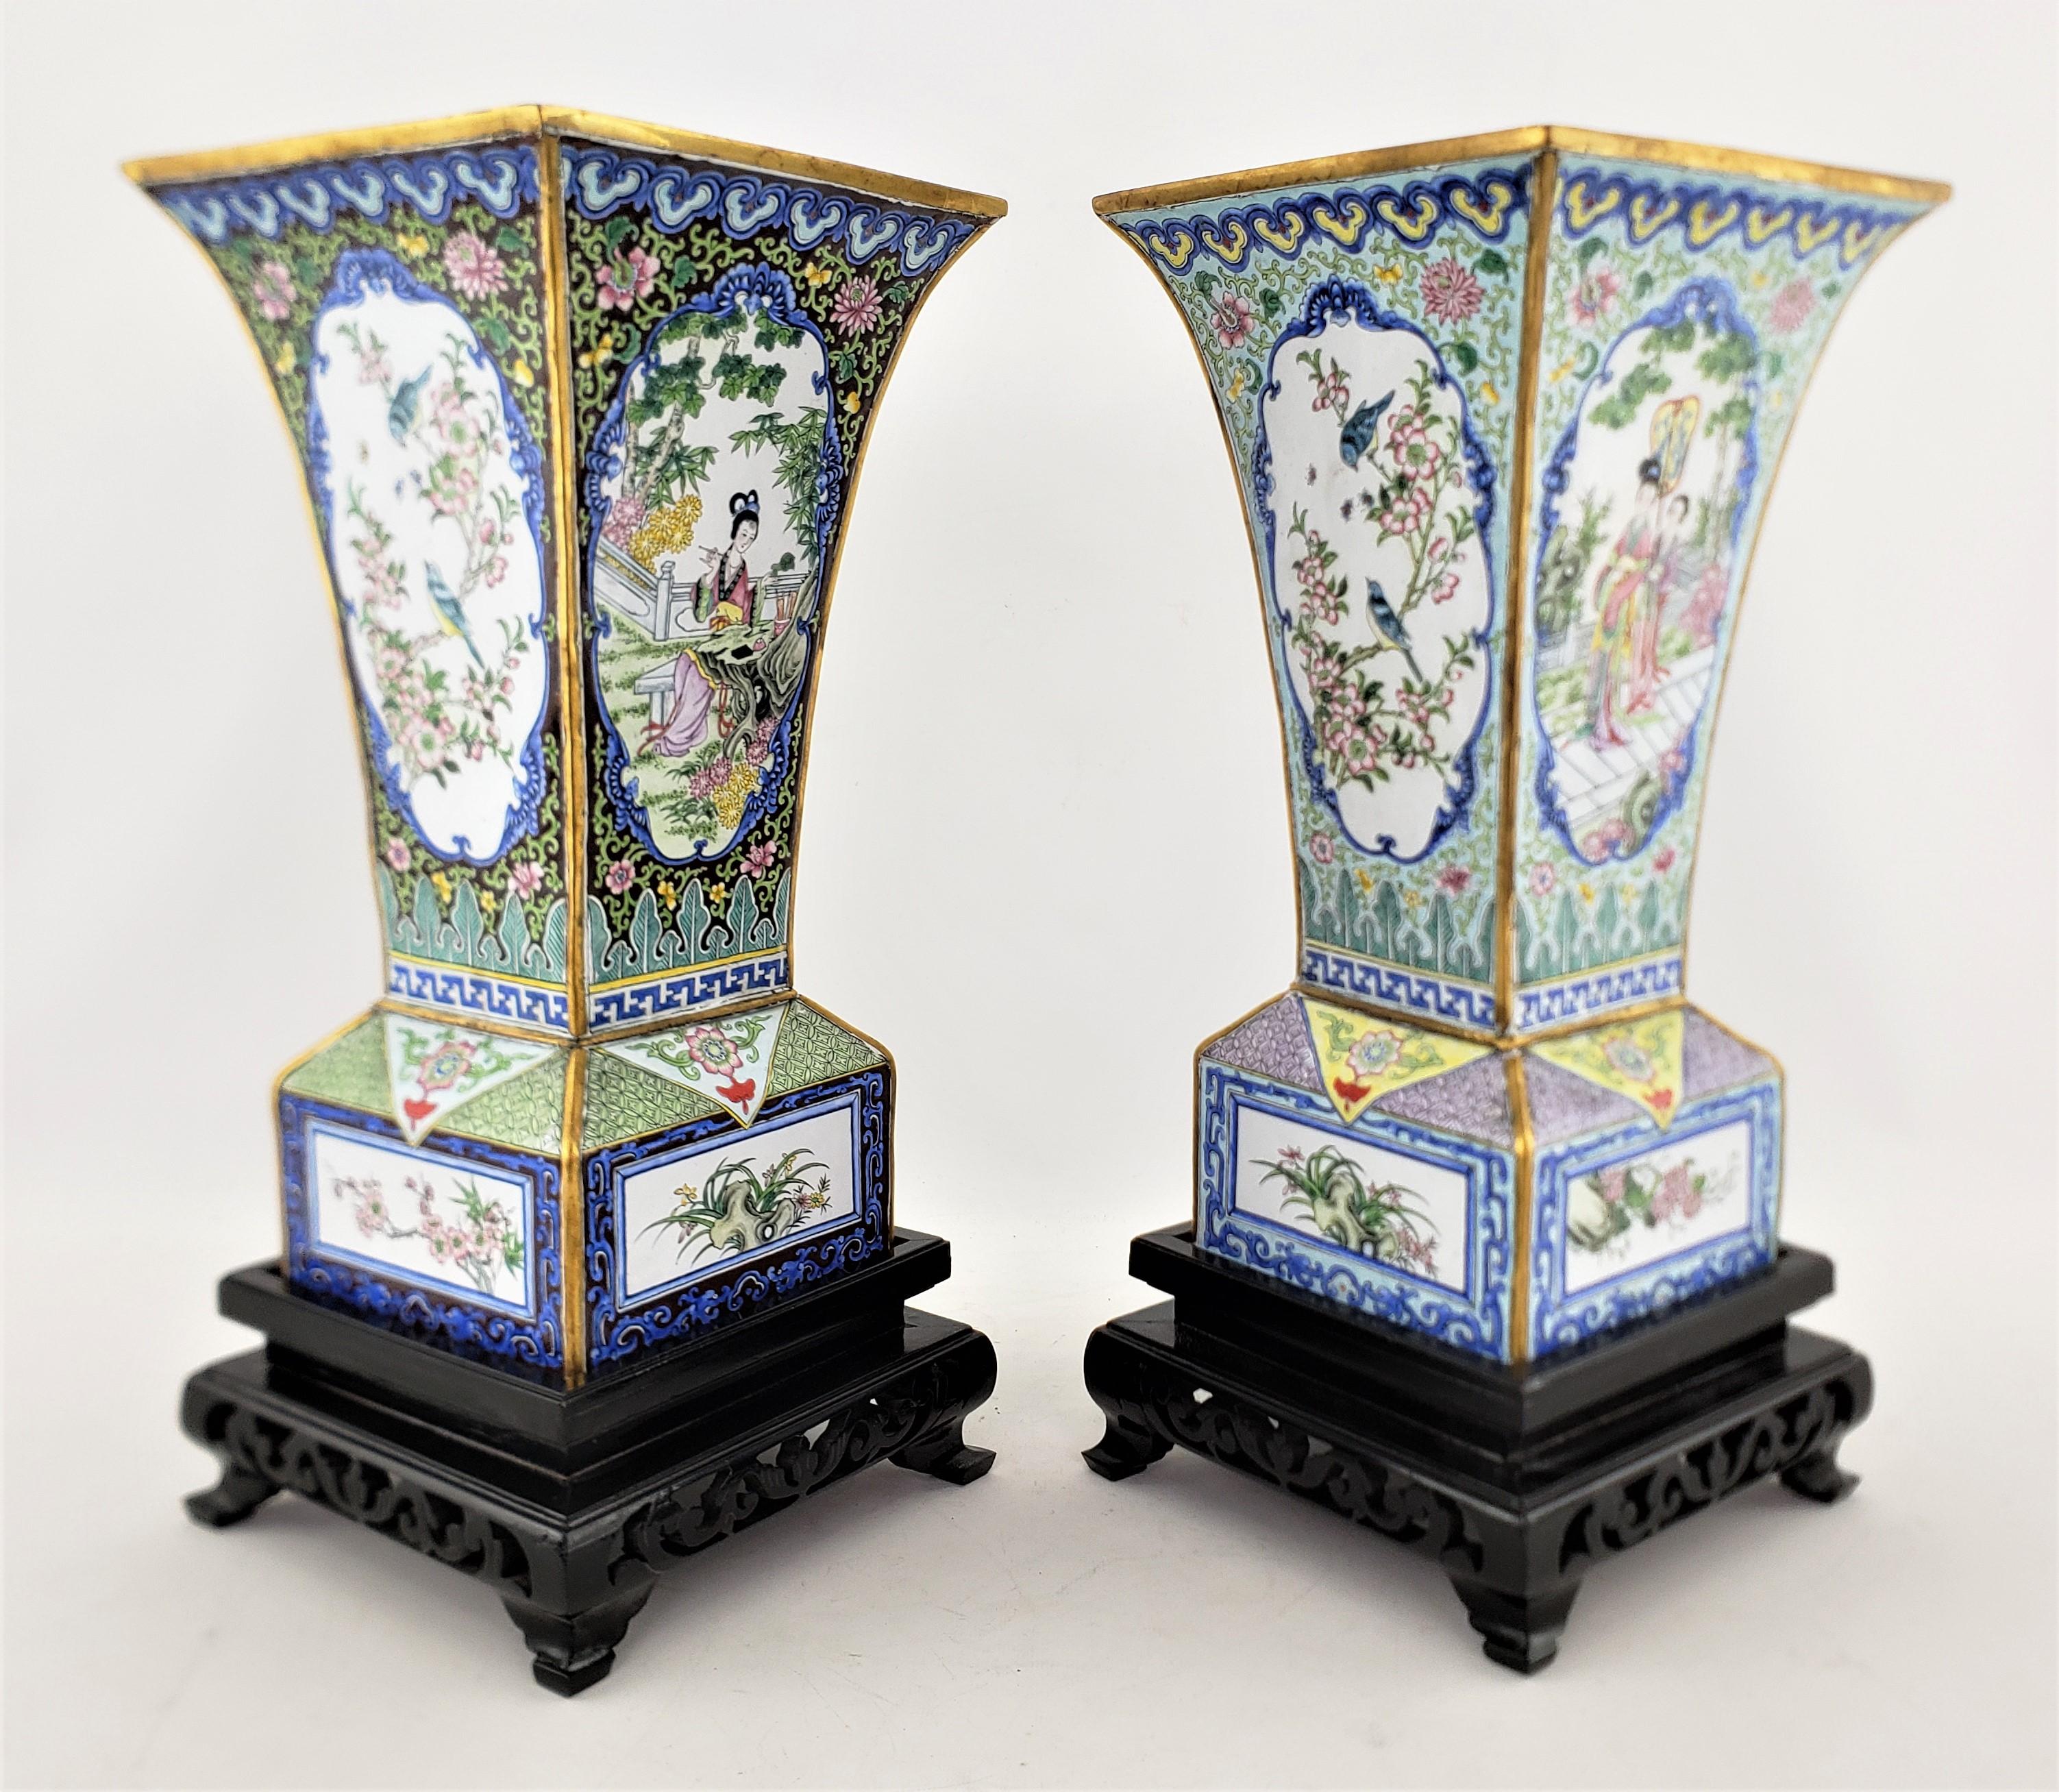 This pair of vases on stands are unsigned, but presumed to have originated from China and dating to approximately 1960 and done in a period Chinese Export style. The vases are composed of copper with tapered sides and block style bases, with very